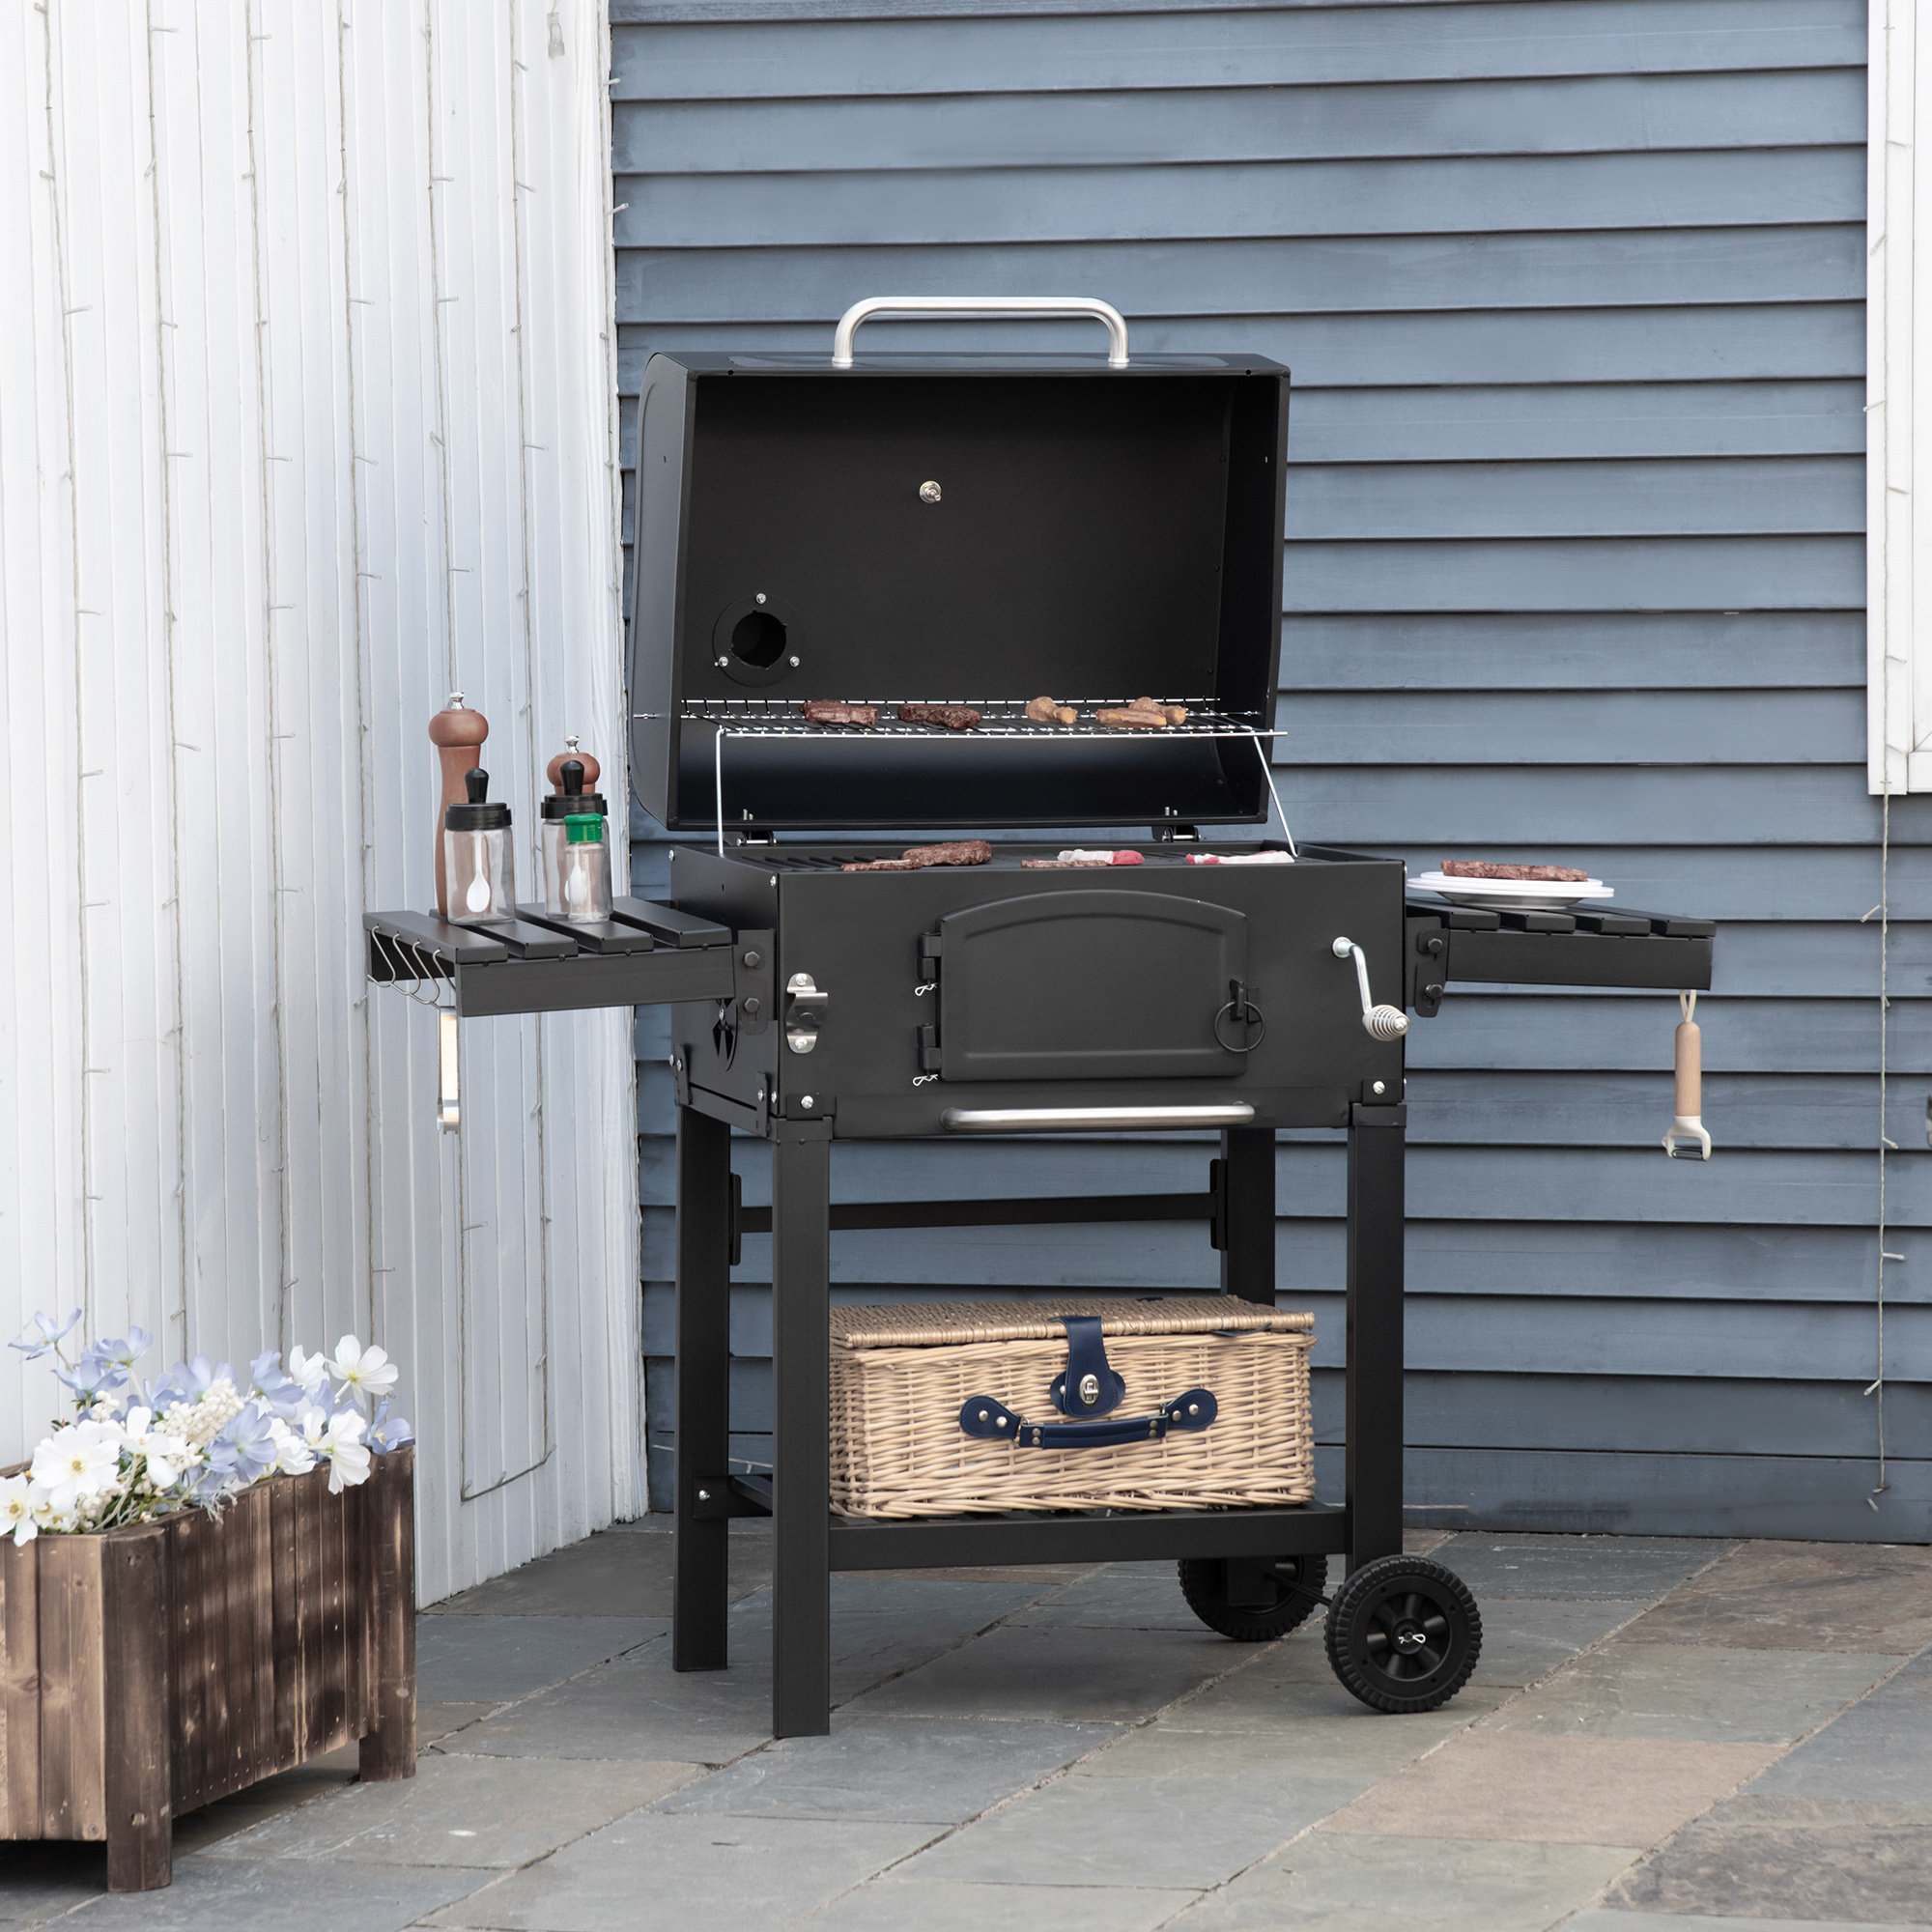 Outdoor Barbecue Grills: Charcoal & Gas BBQs